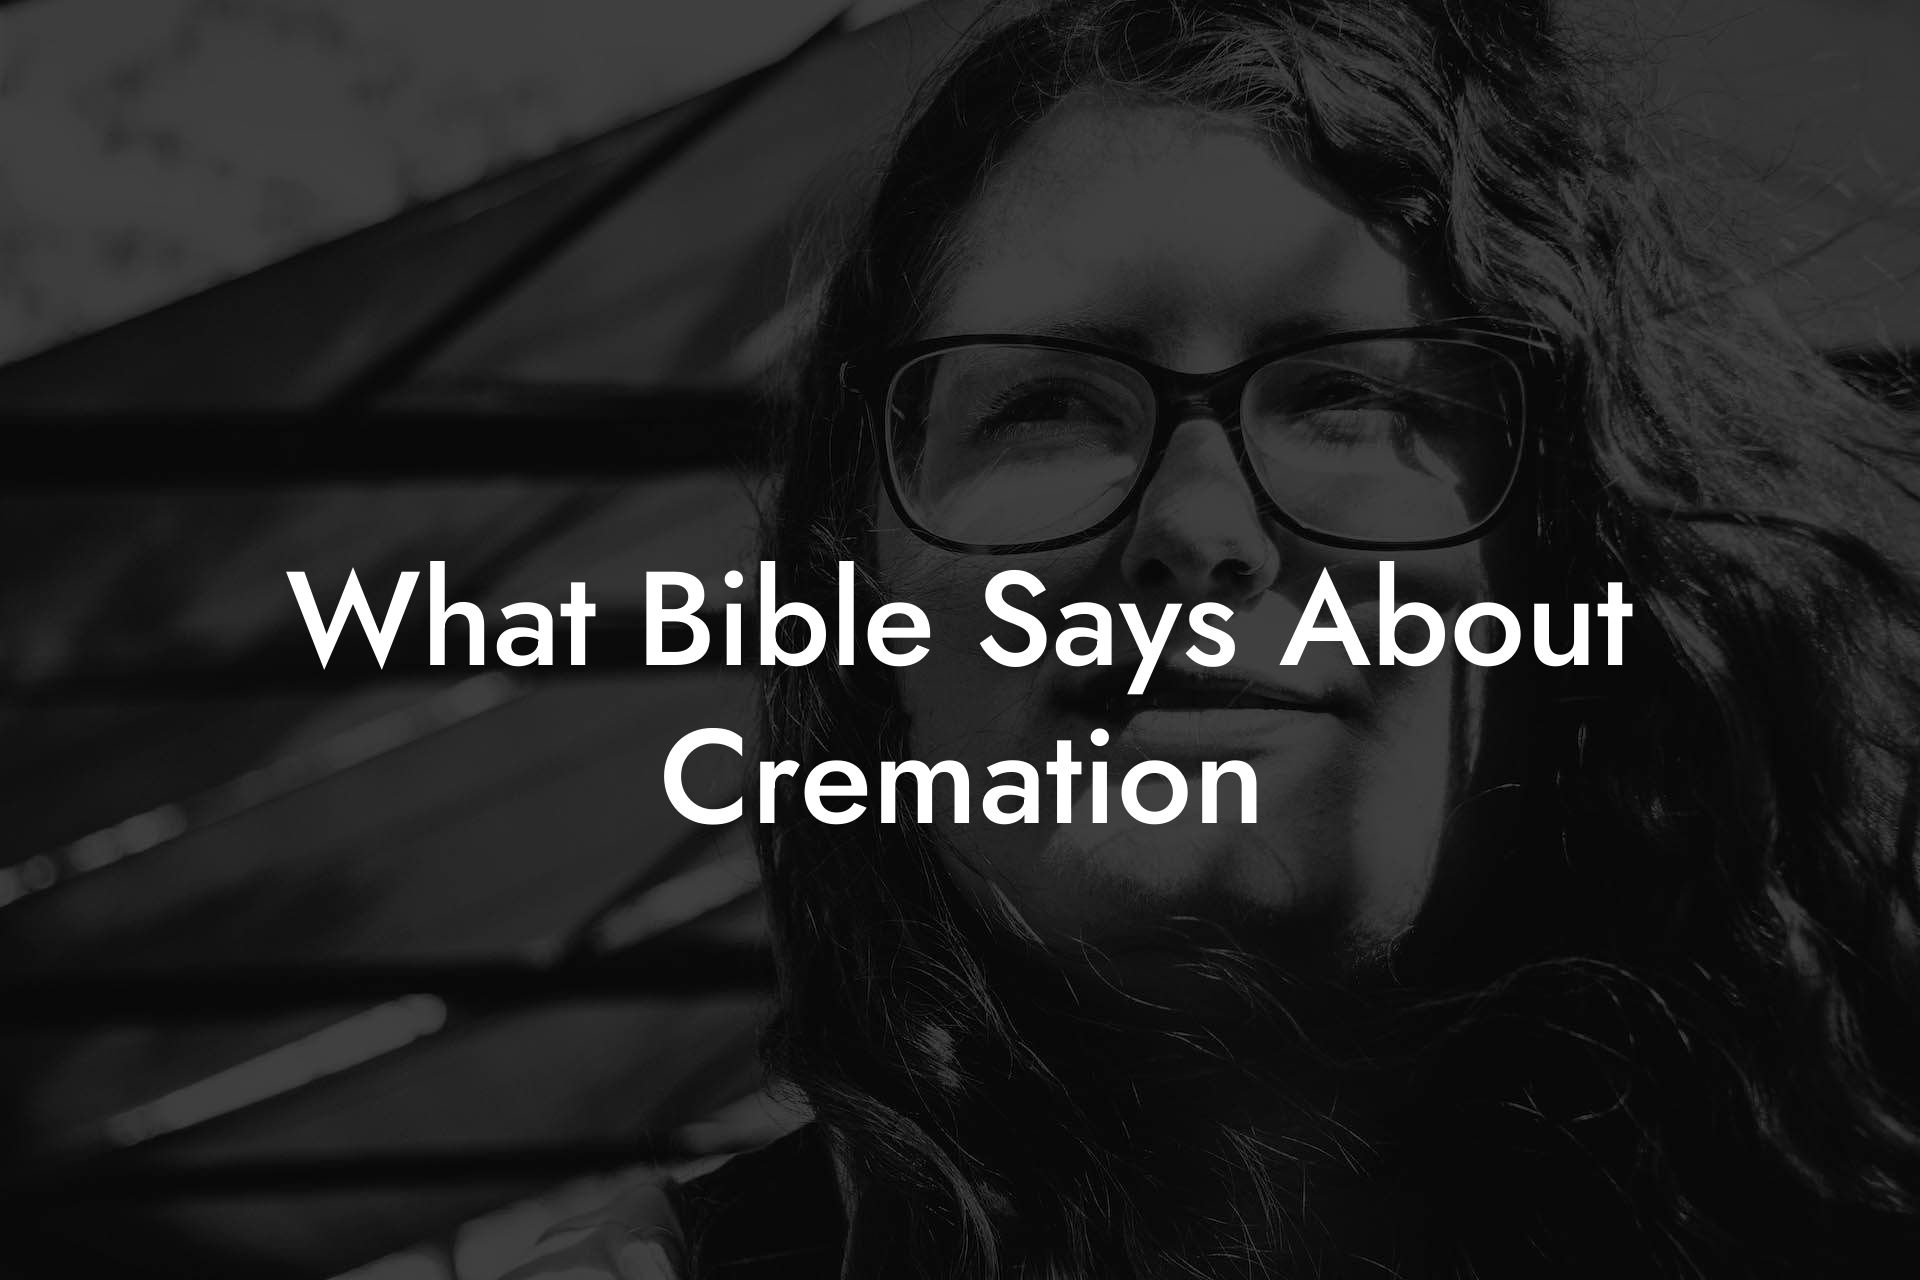 What Bible Says About Cremation